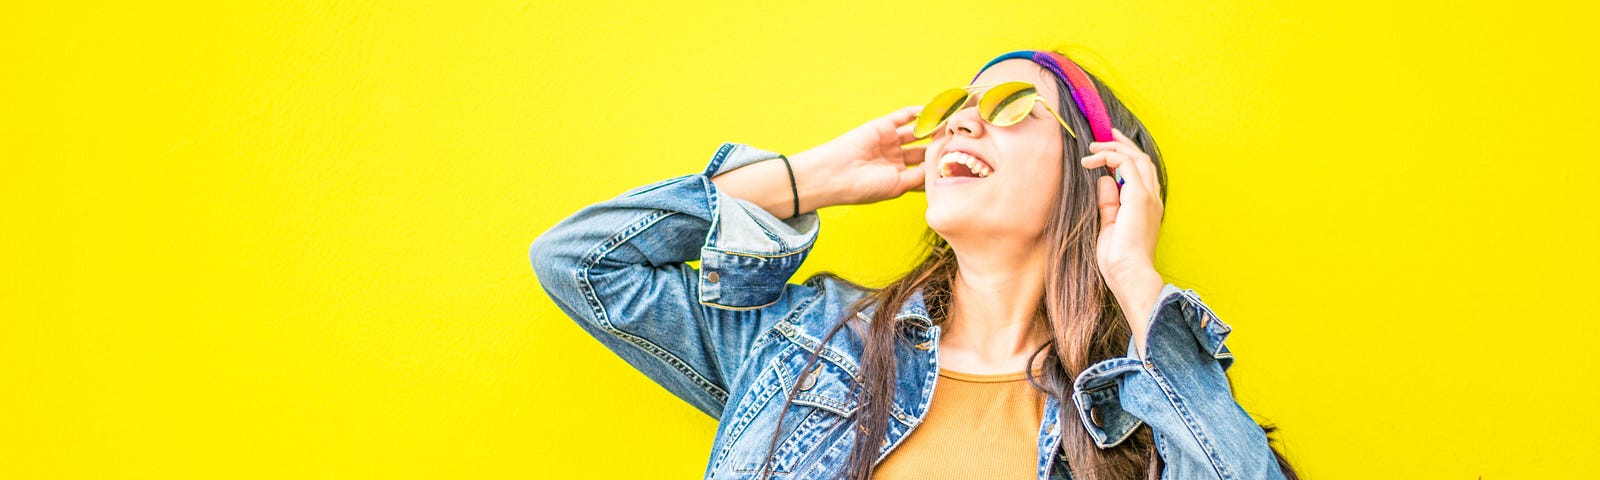 Young women in sunglasses looking up and smiling in front of a bright yellow background.